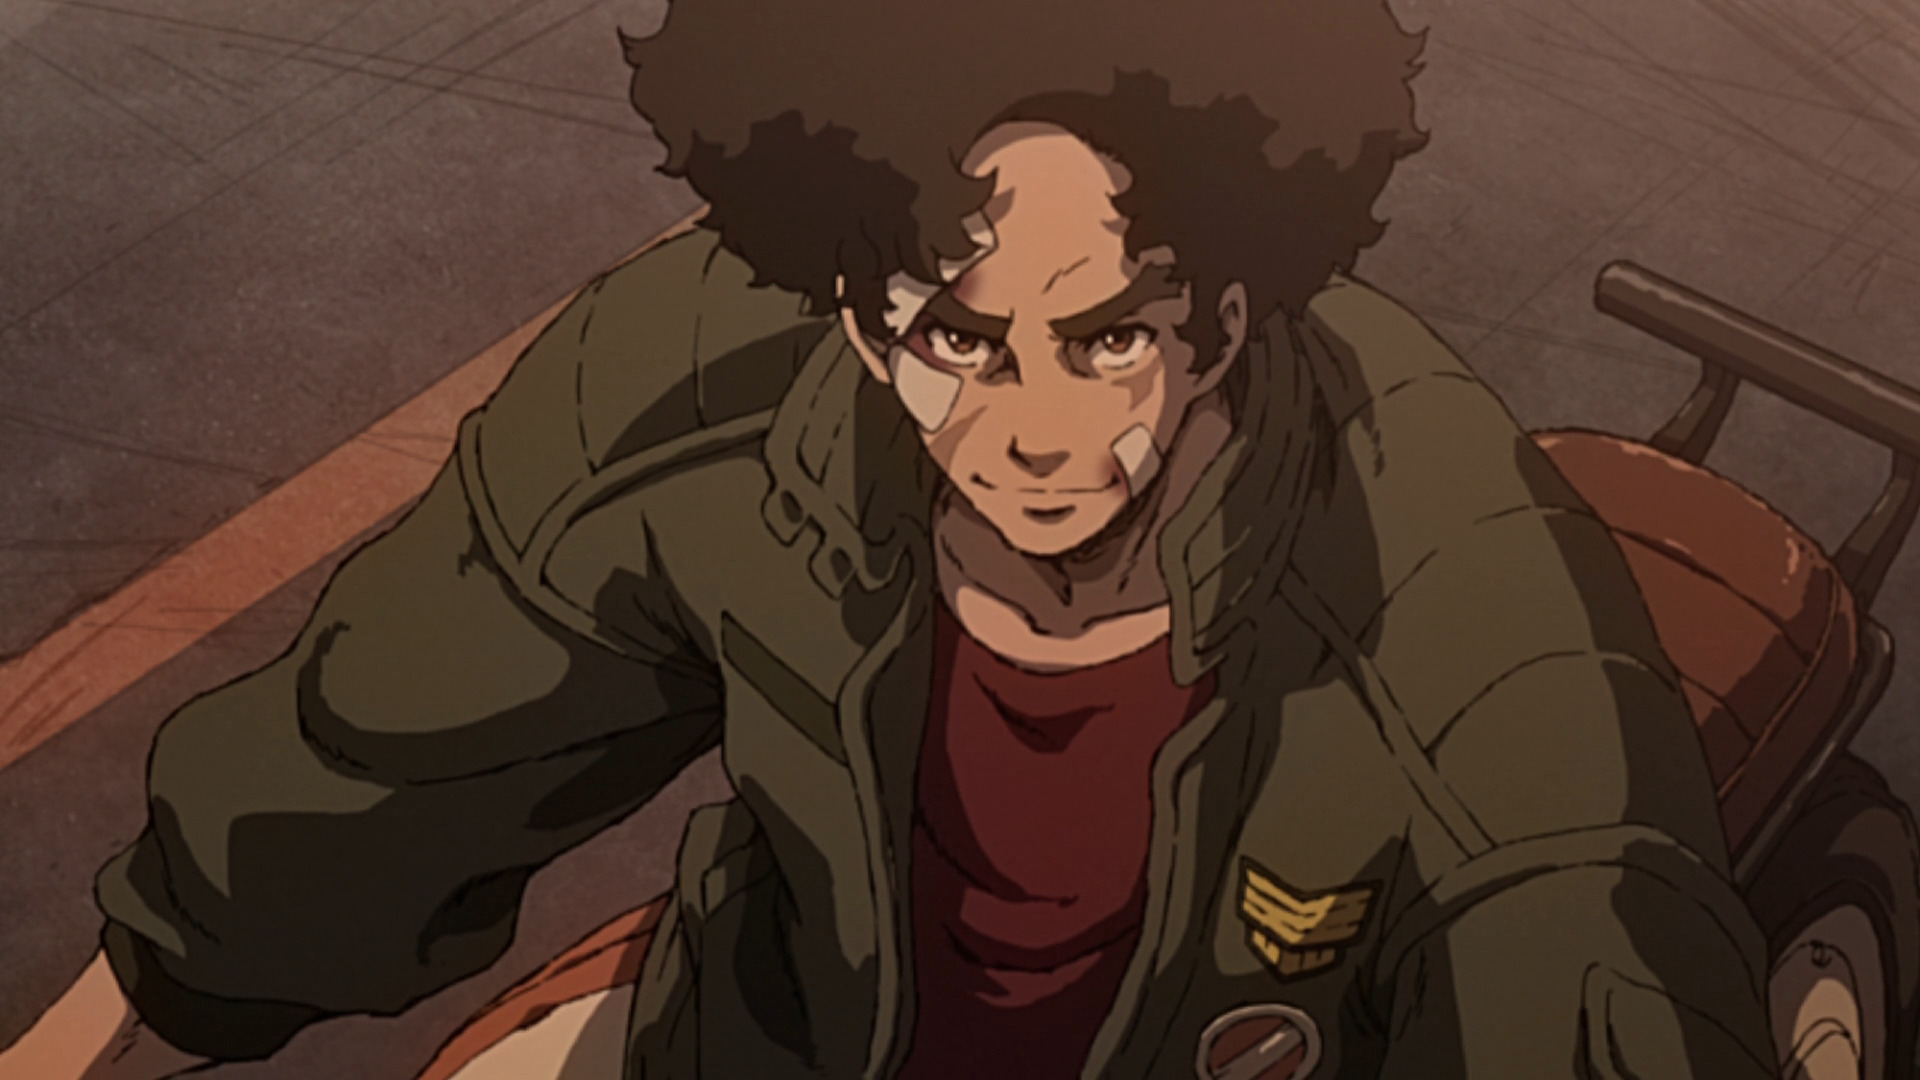 Joe from Megalobox on a motorcycle, smiling.